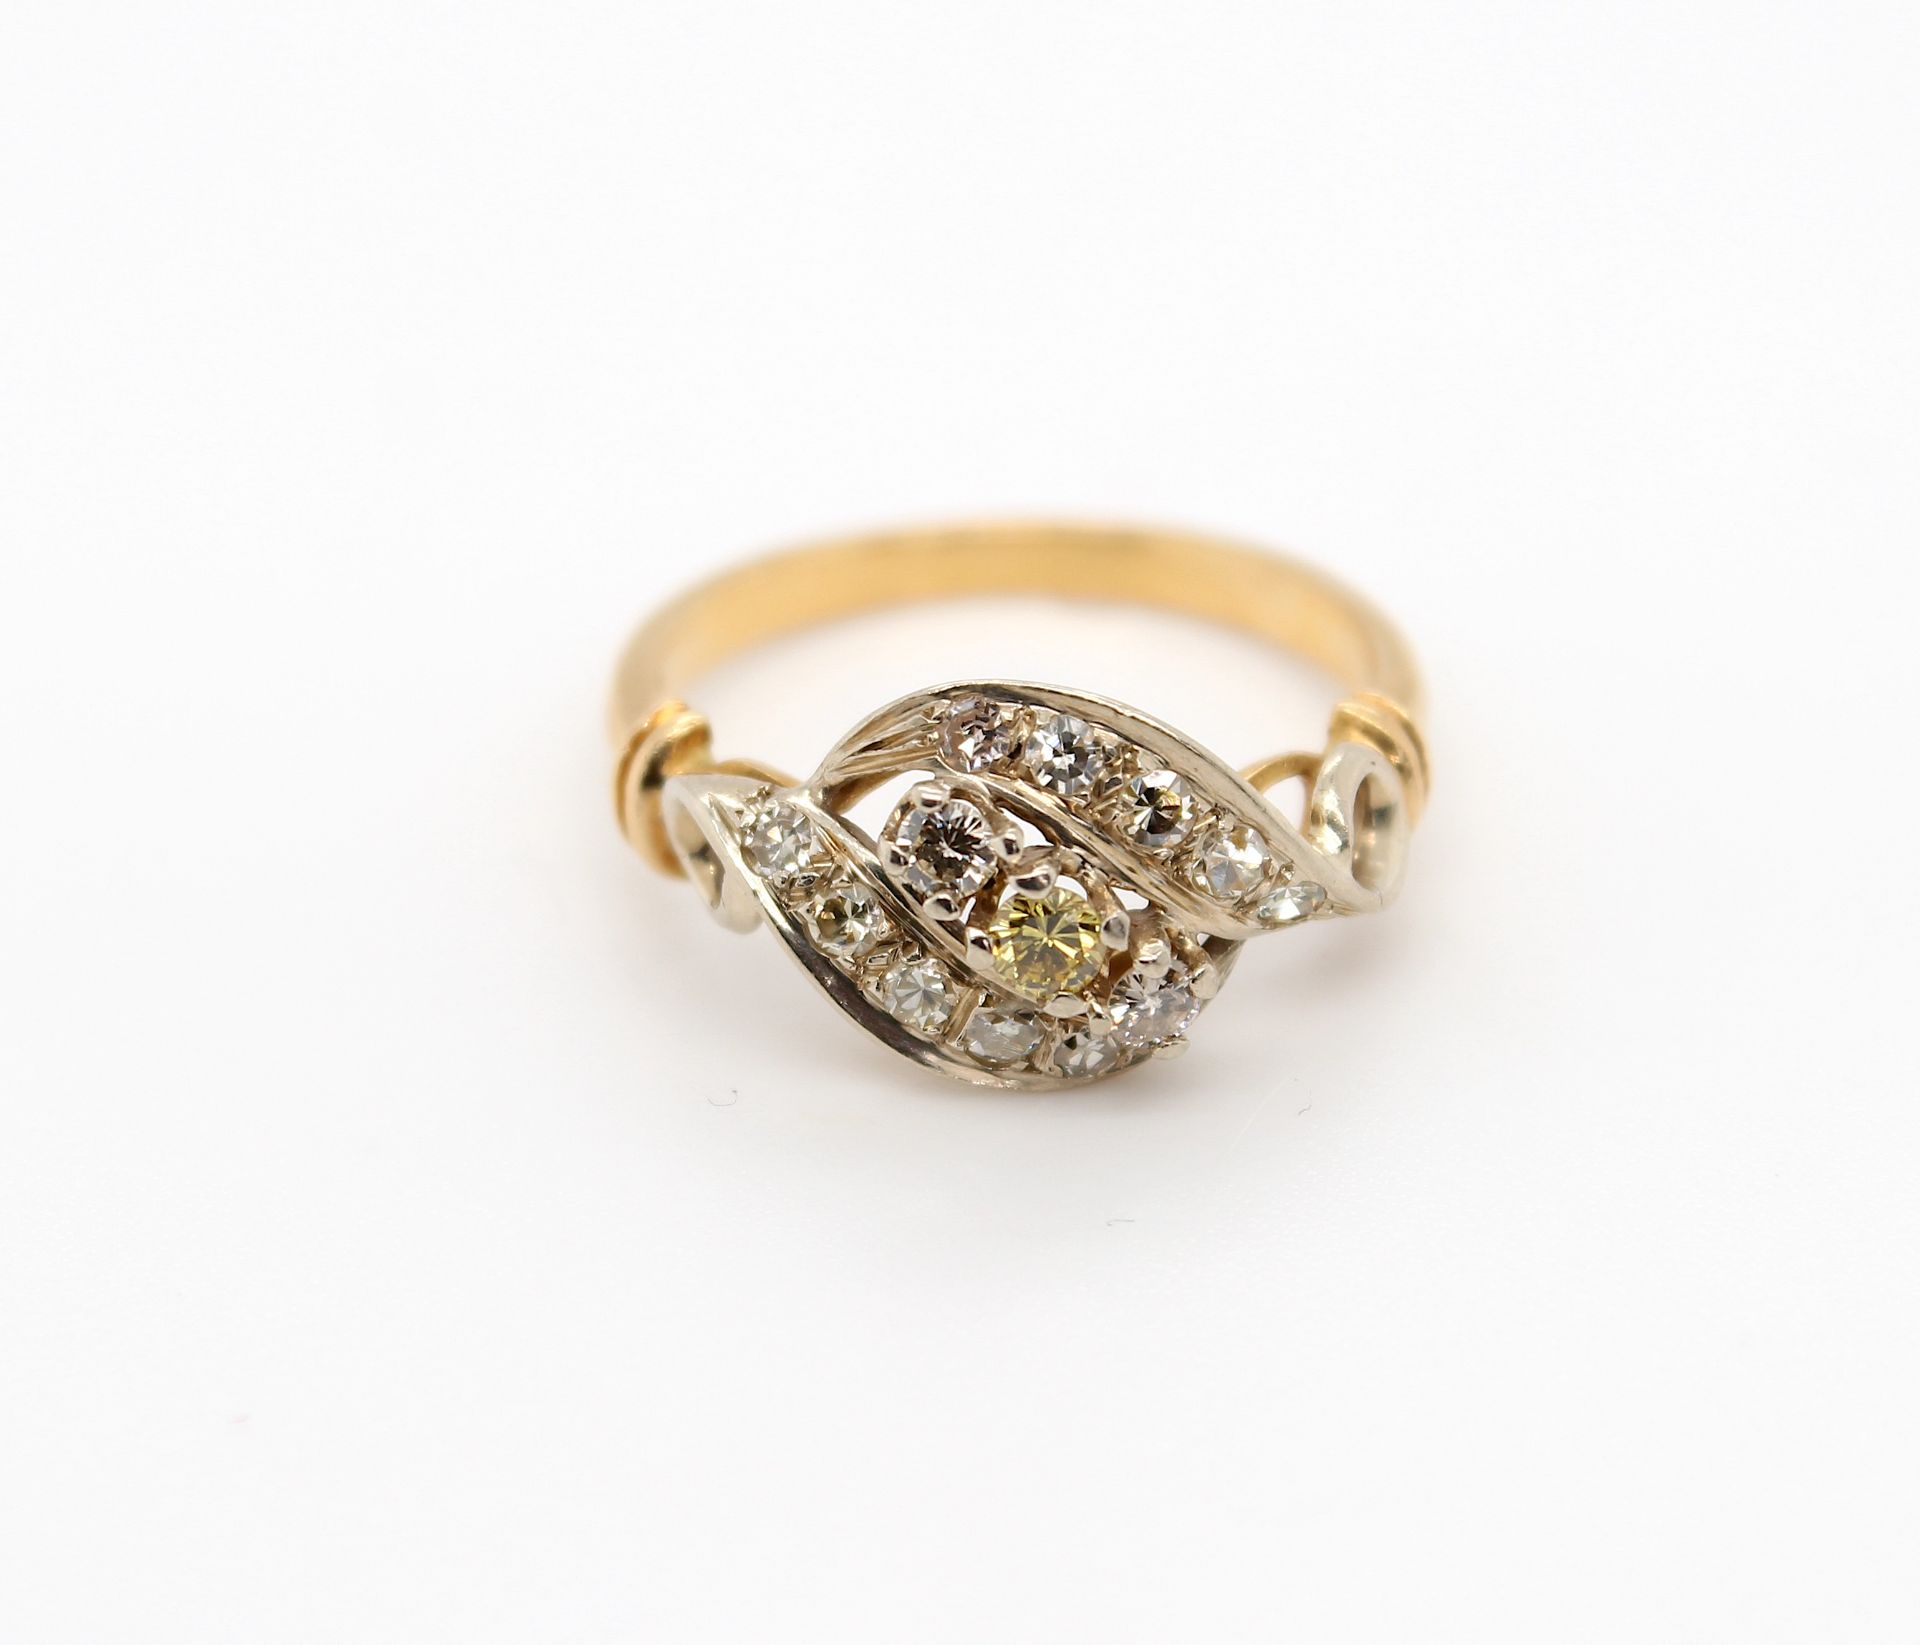 Ring with diamonds, brilliants, total ca. 0,46 ct - Image 2 of 4